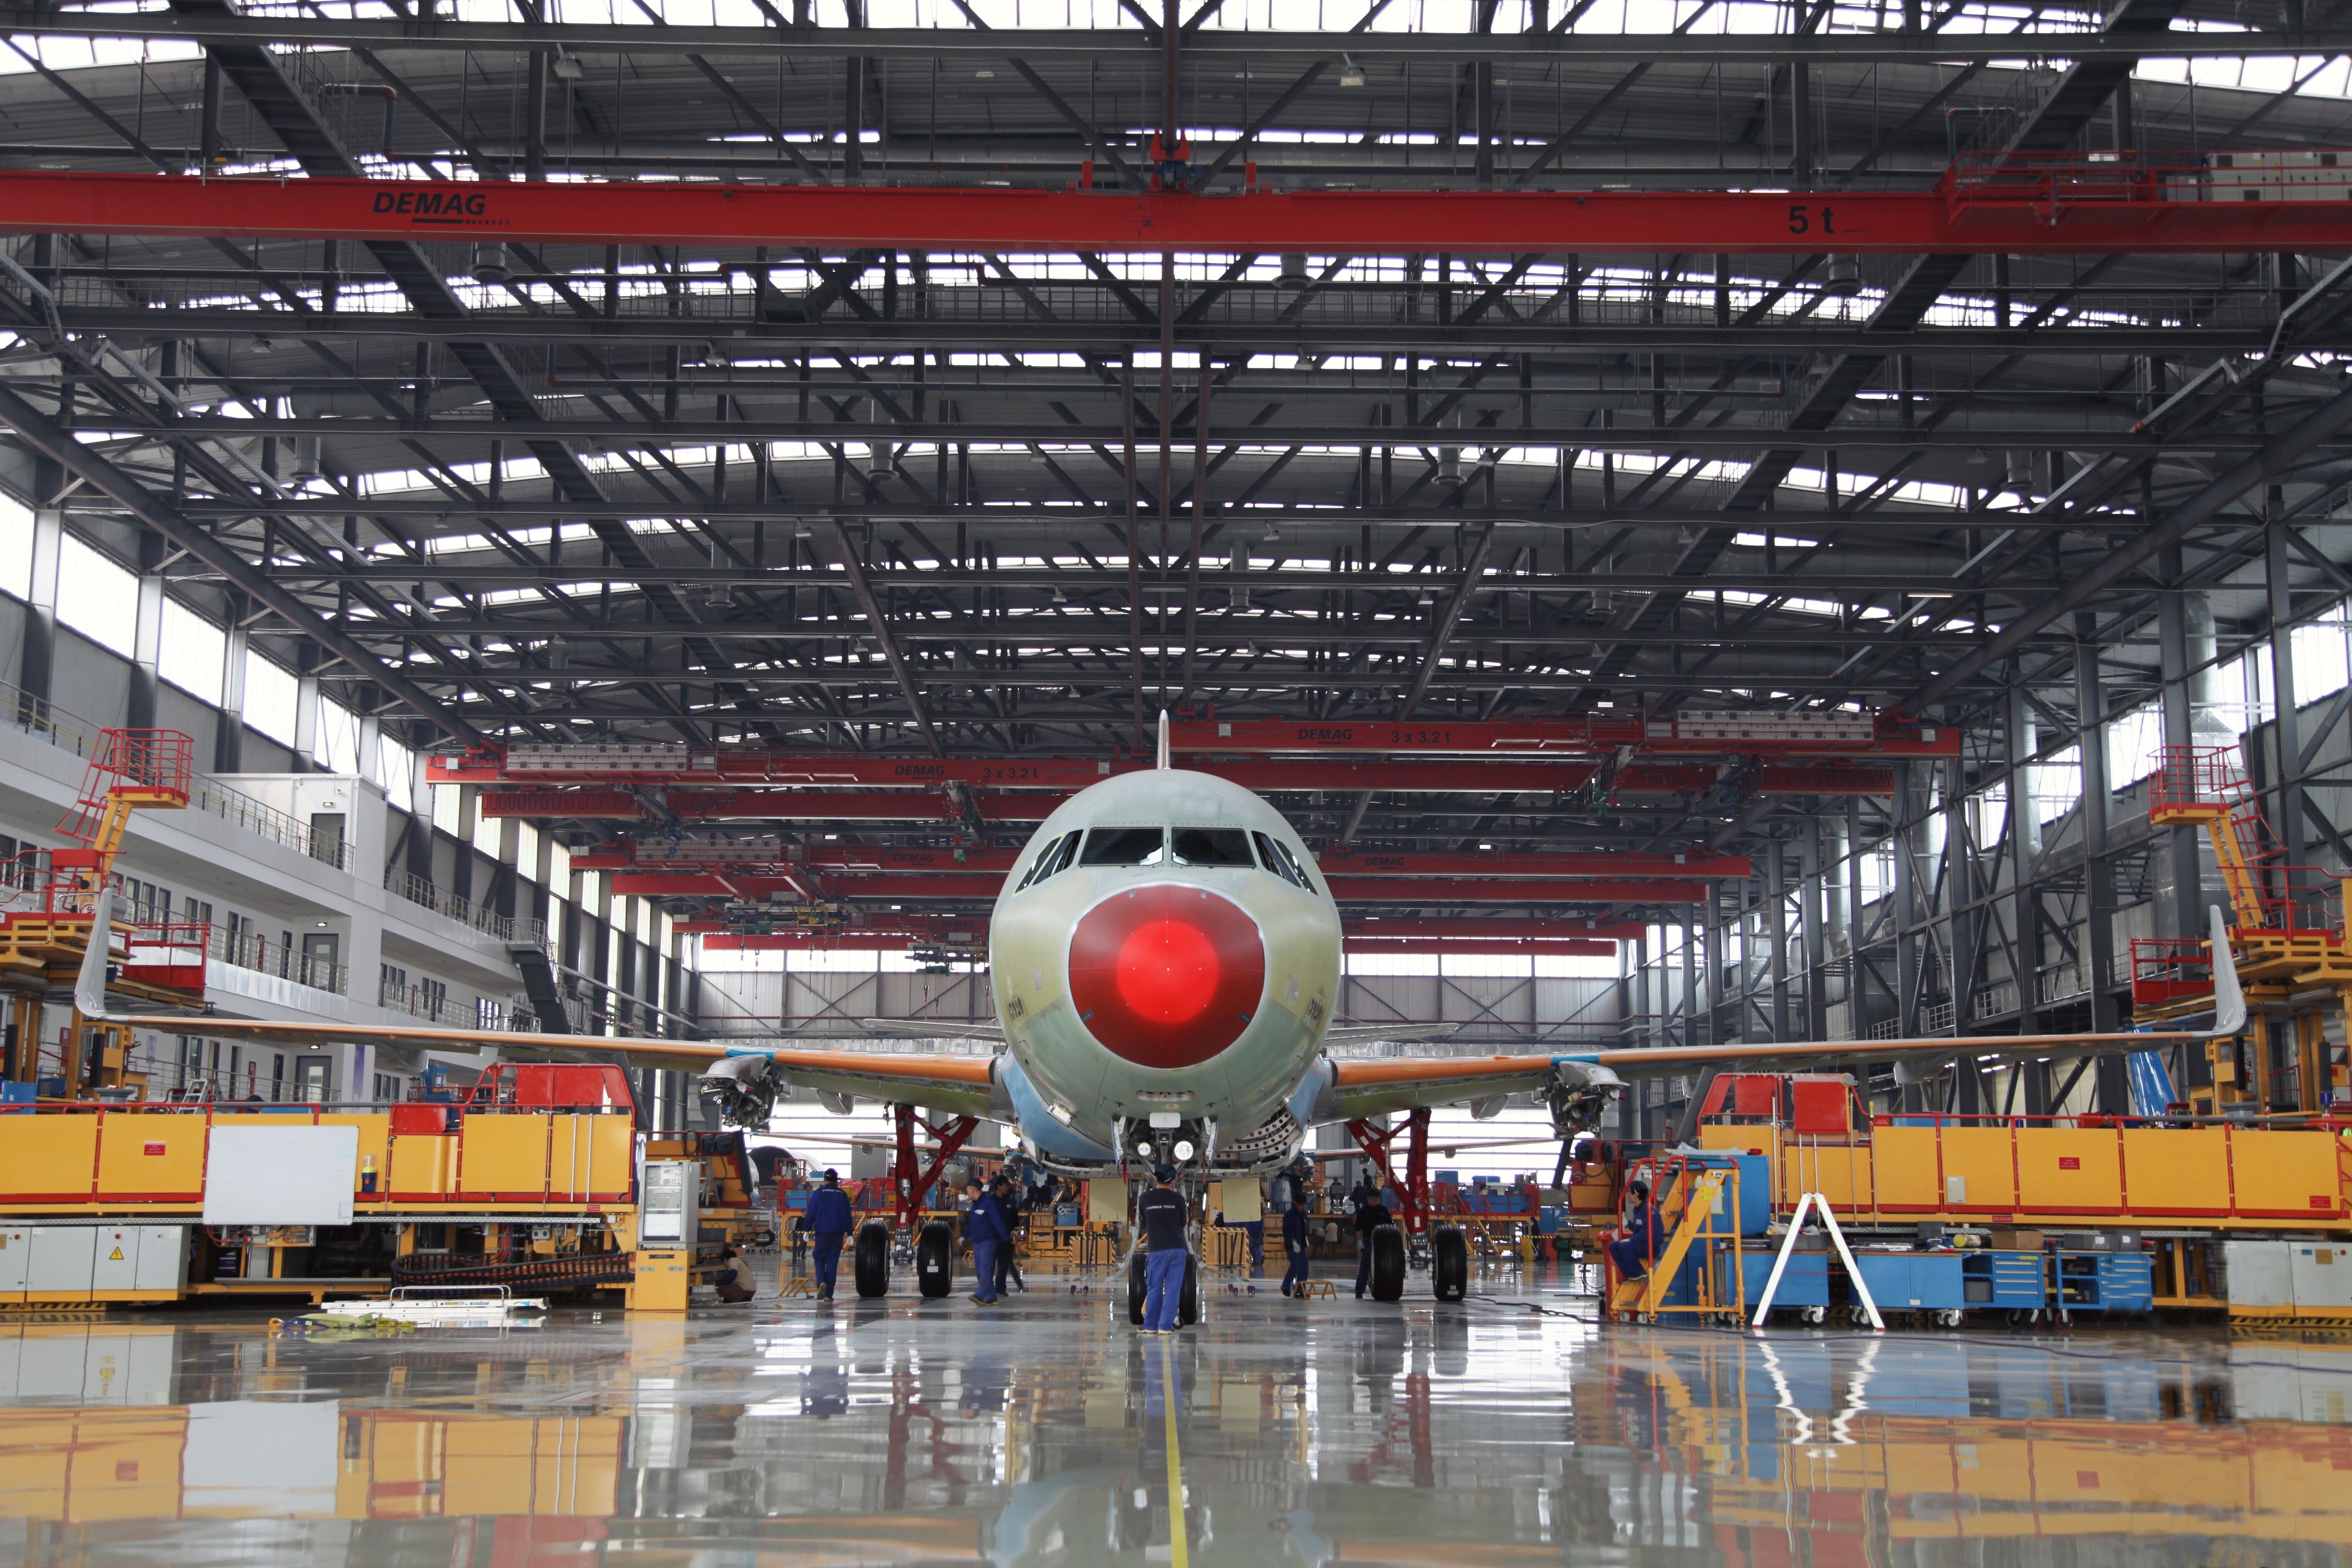 An Airbus A320 parked in the Final Assembly Line in Tianjin.